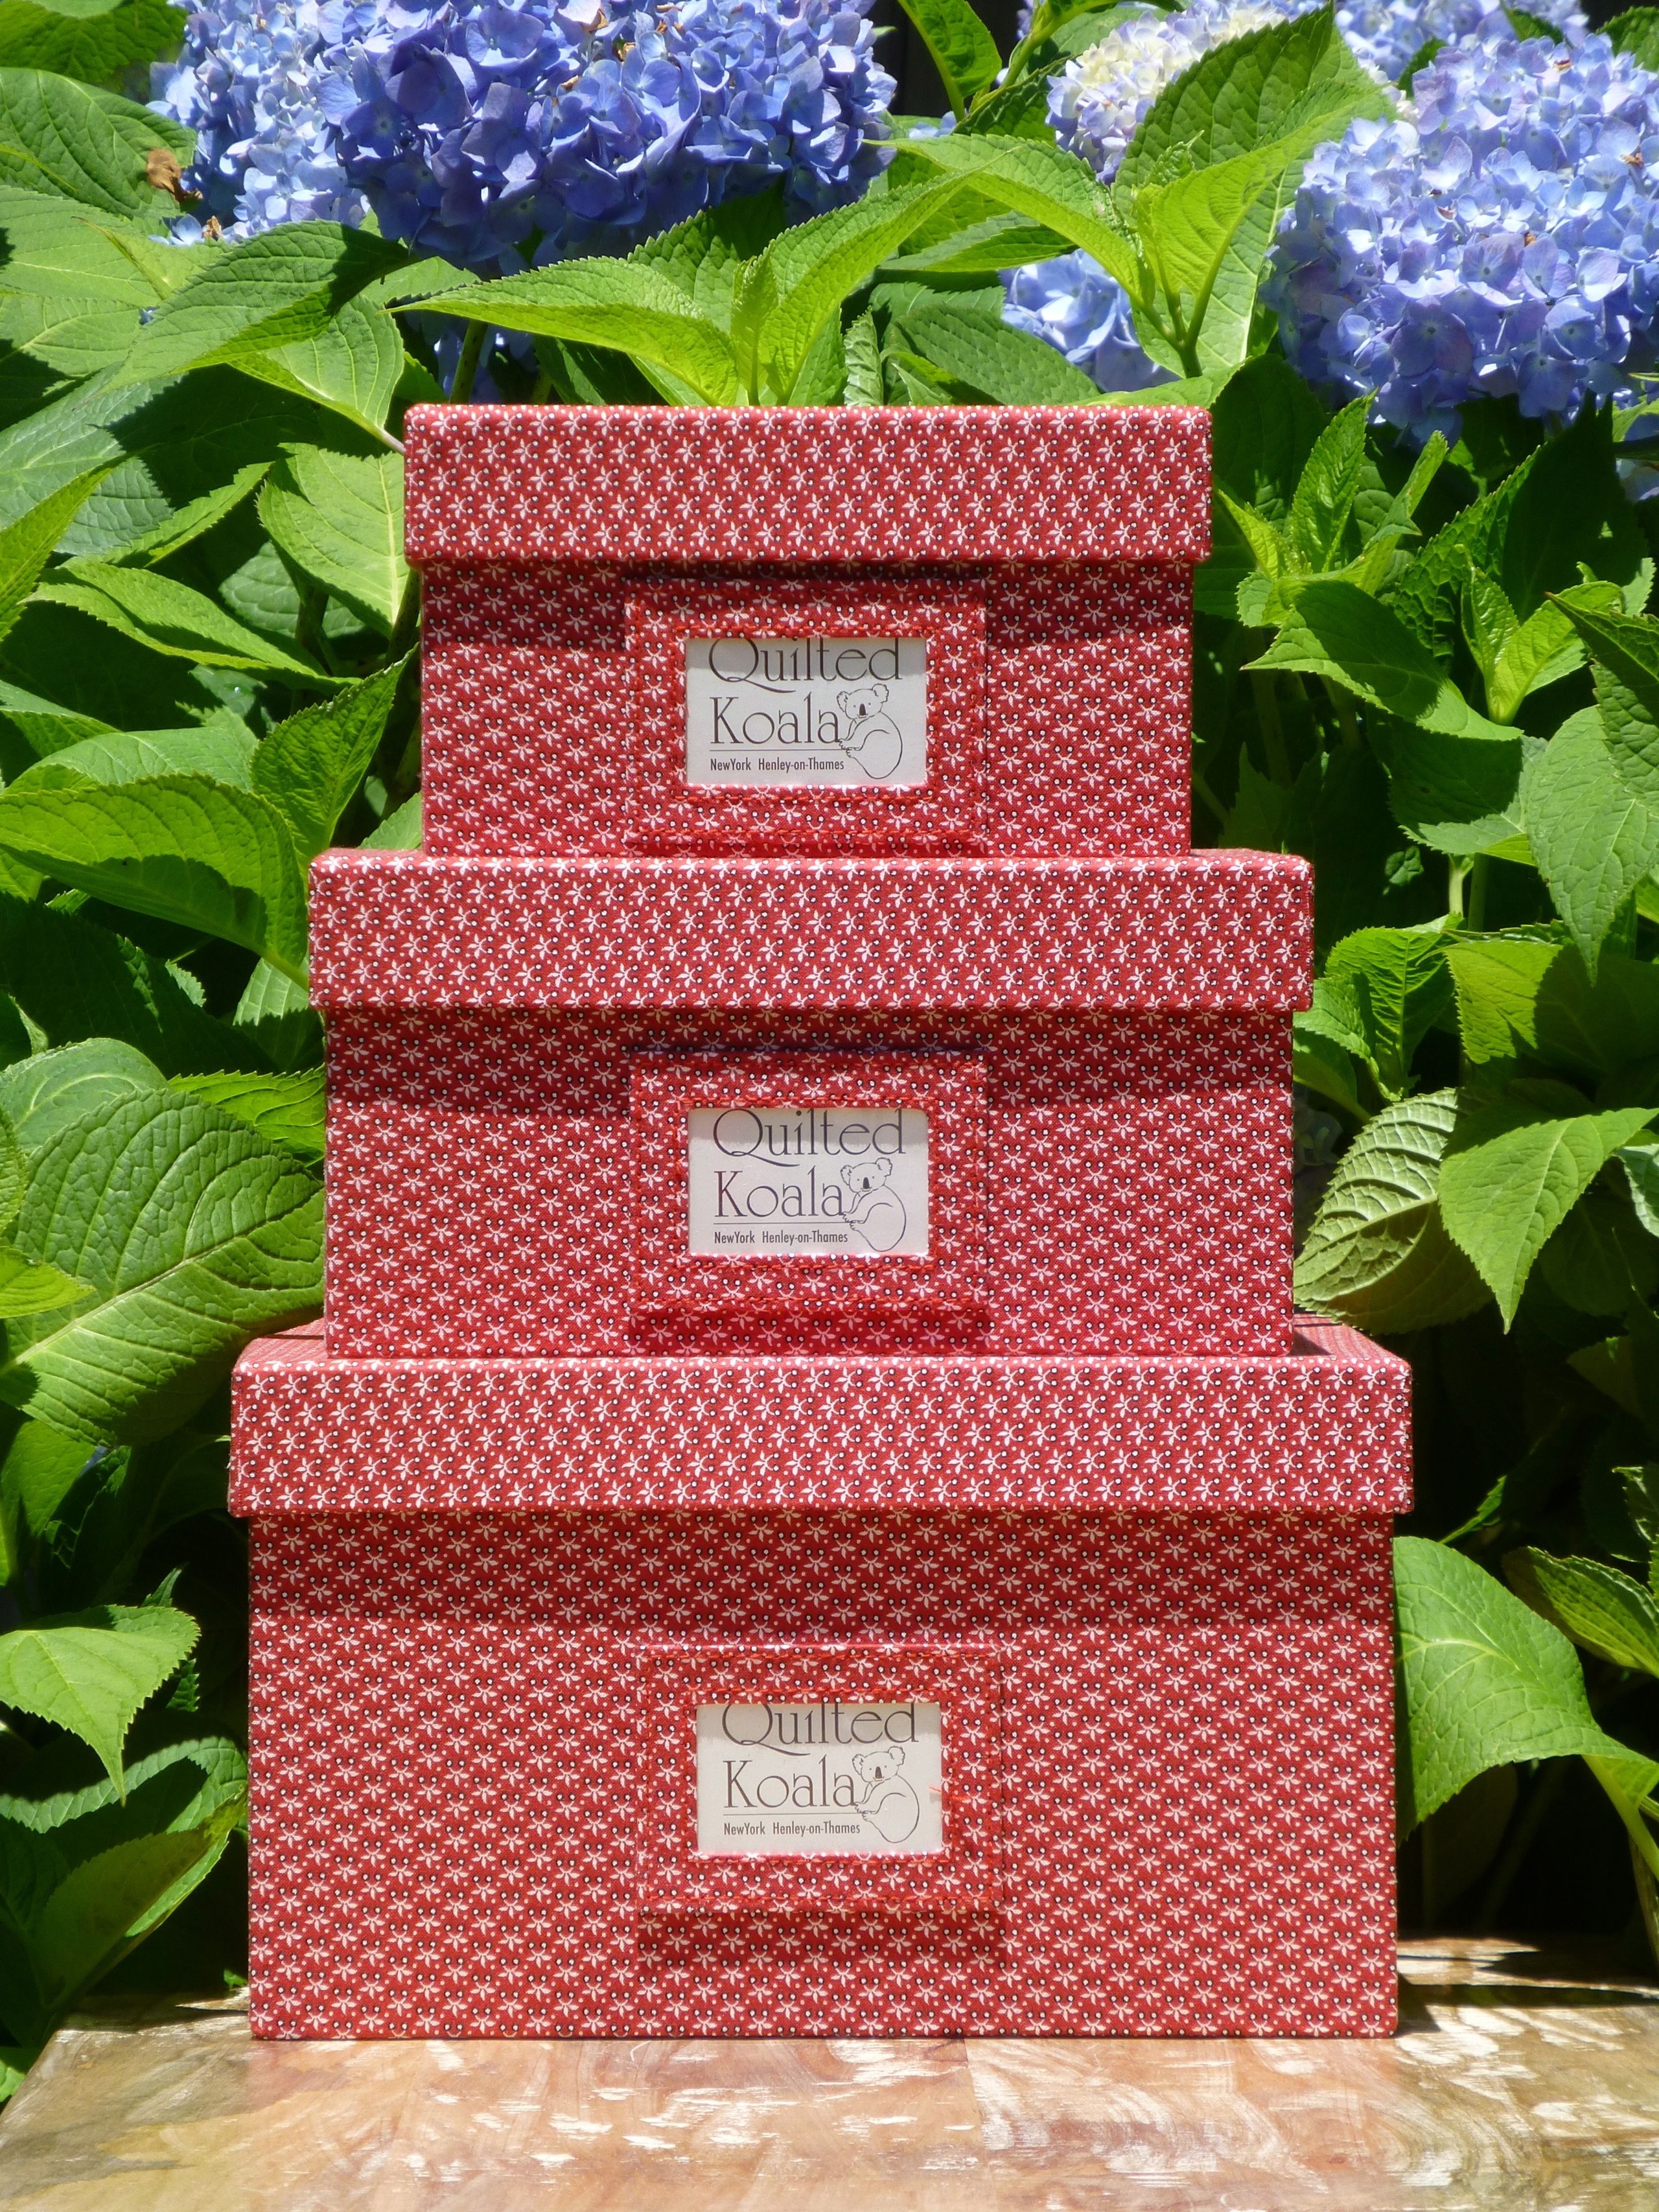 If you love red youll love our stackable red calico